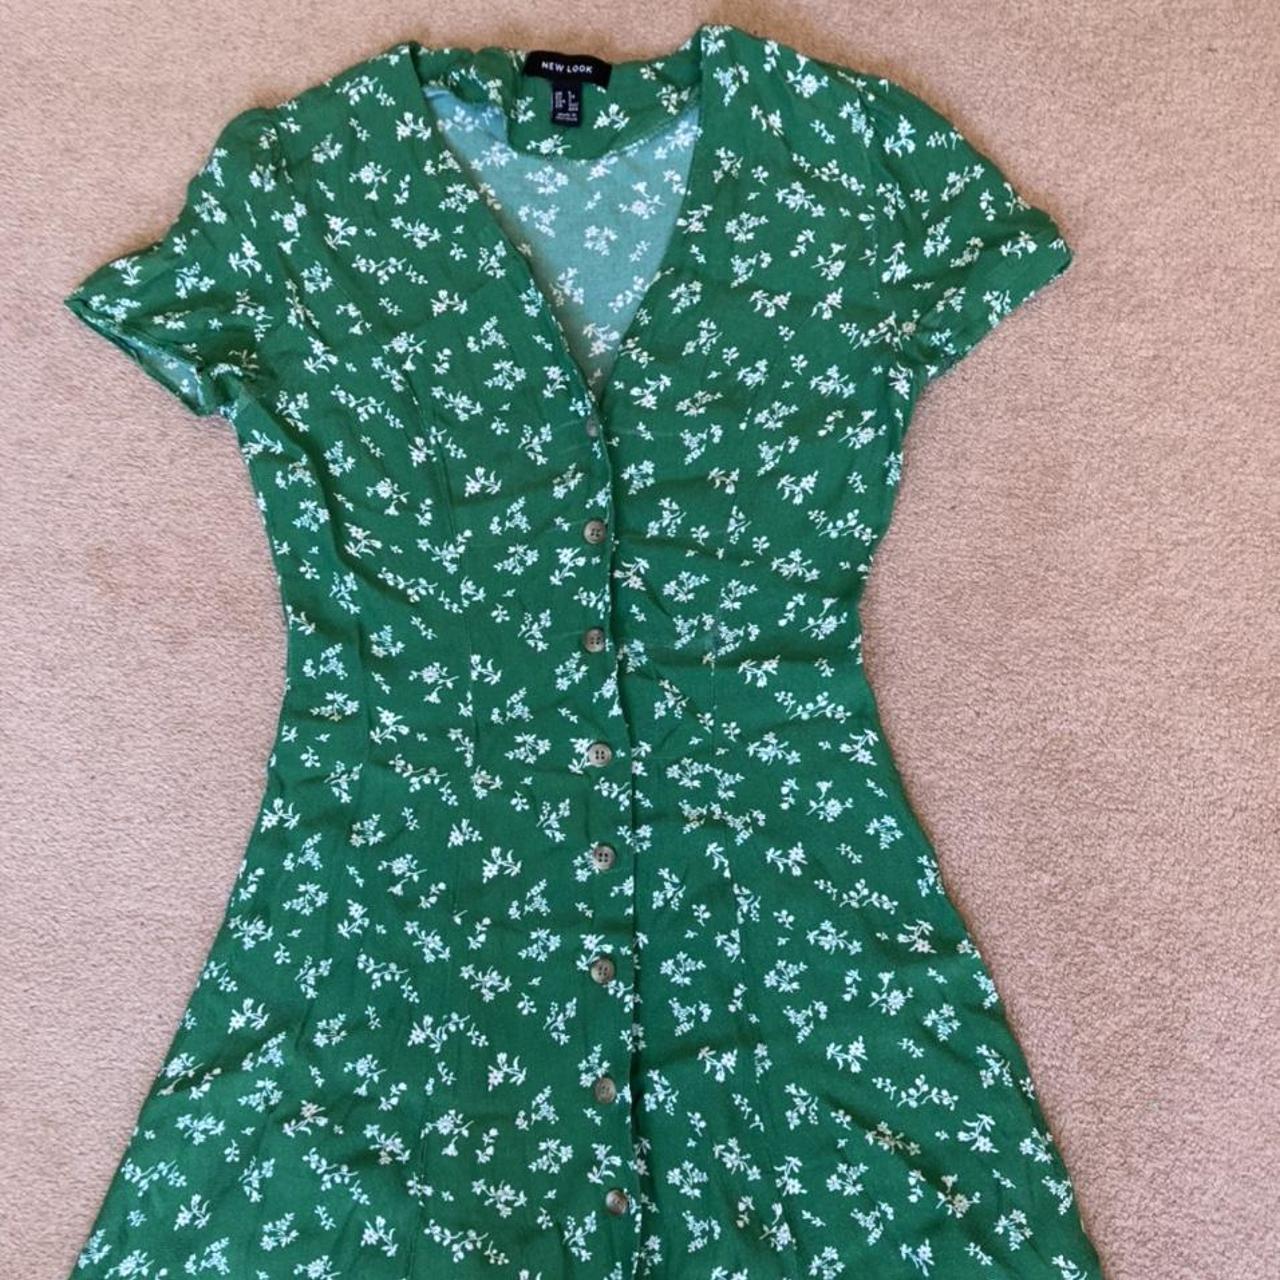 New Look Women's Green and White Dress | Depop